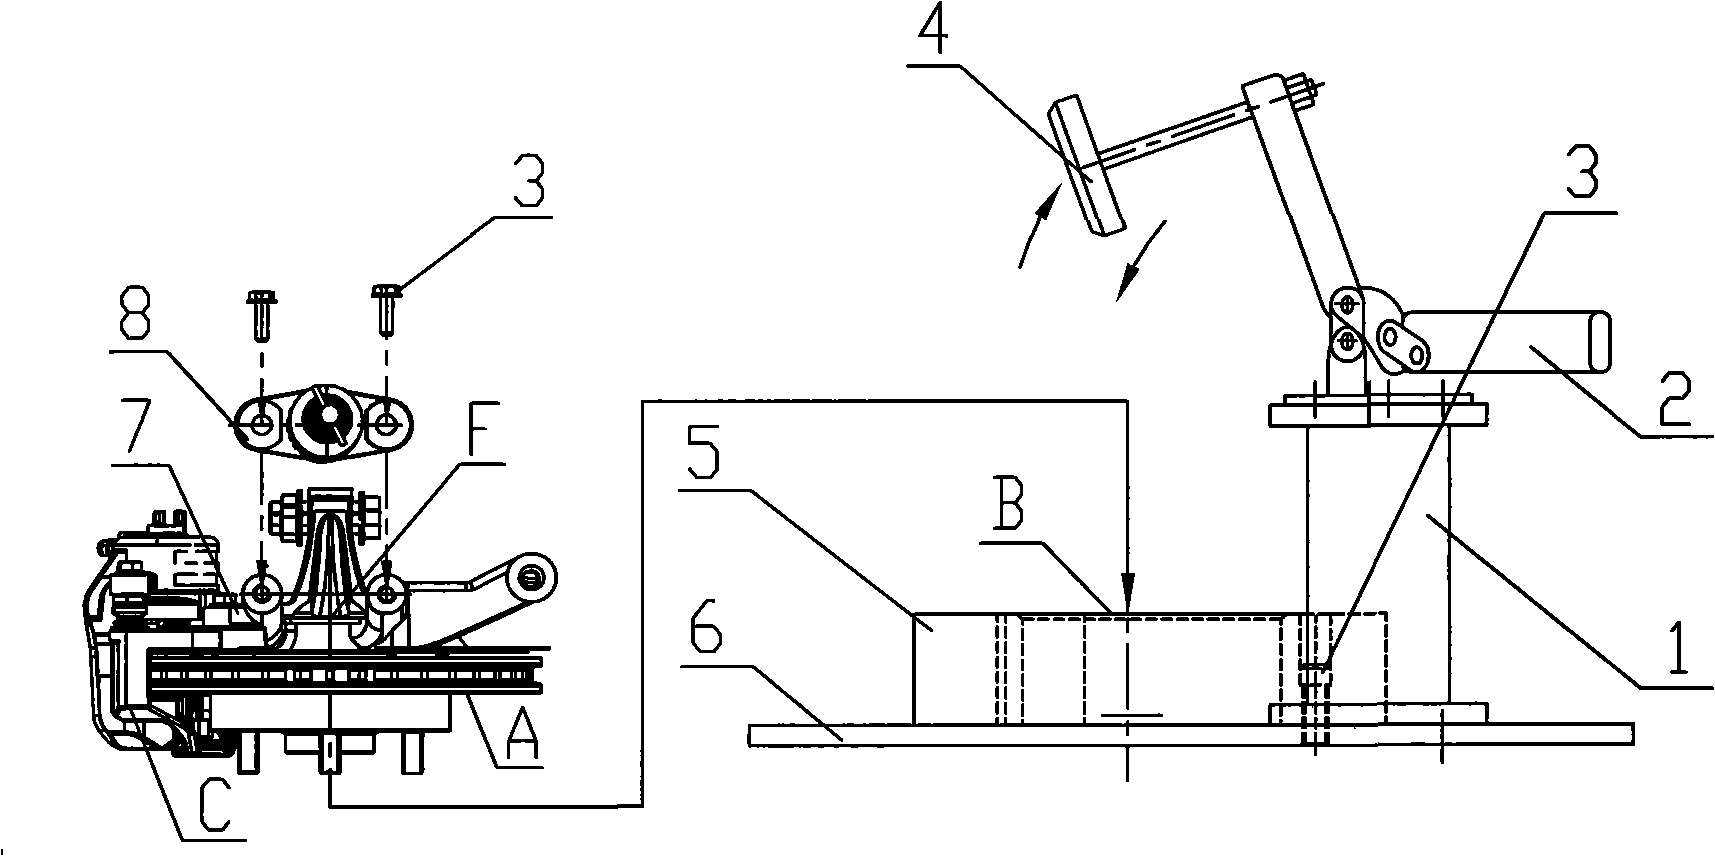 Front brake subassembly clamper for vehicle